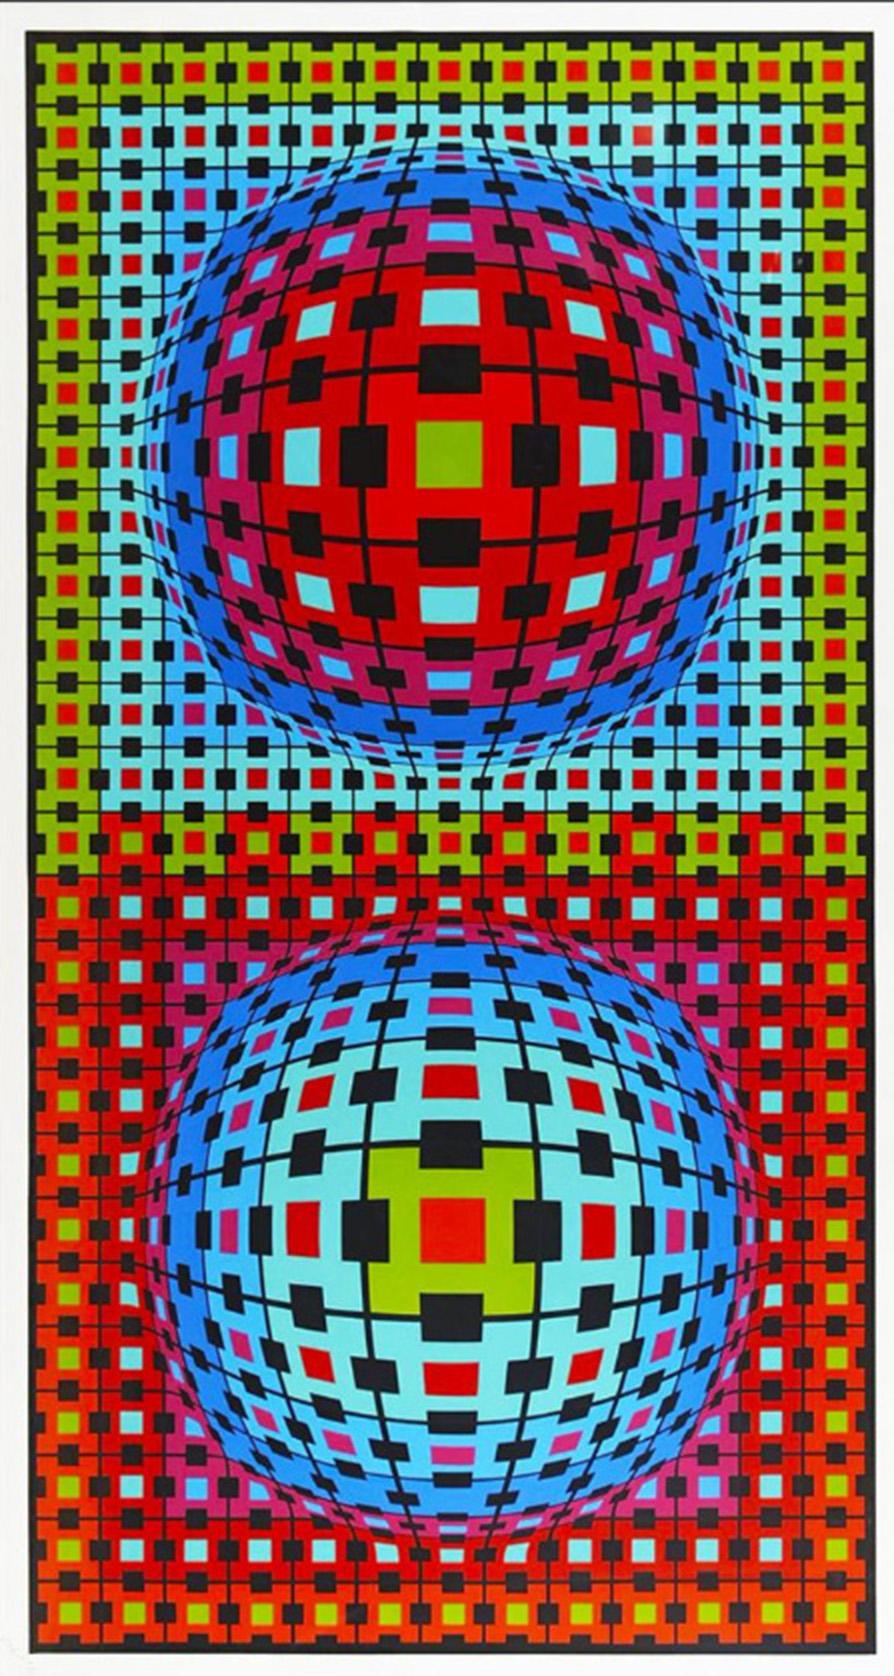 This bright and psychedelic lithograph by Vasarely can be oriented both vertically and horizontally. It features a signature and dedication in pencil by the artist.

Composition Ionau
Victor Vasarely, Hungarian (1908–1997)
Date: 1987
Screenprint,